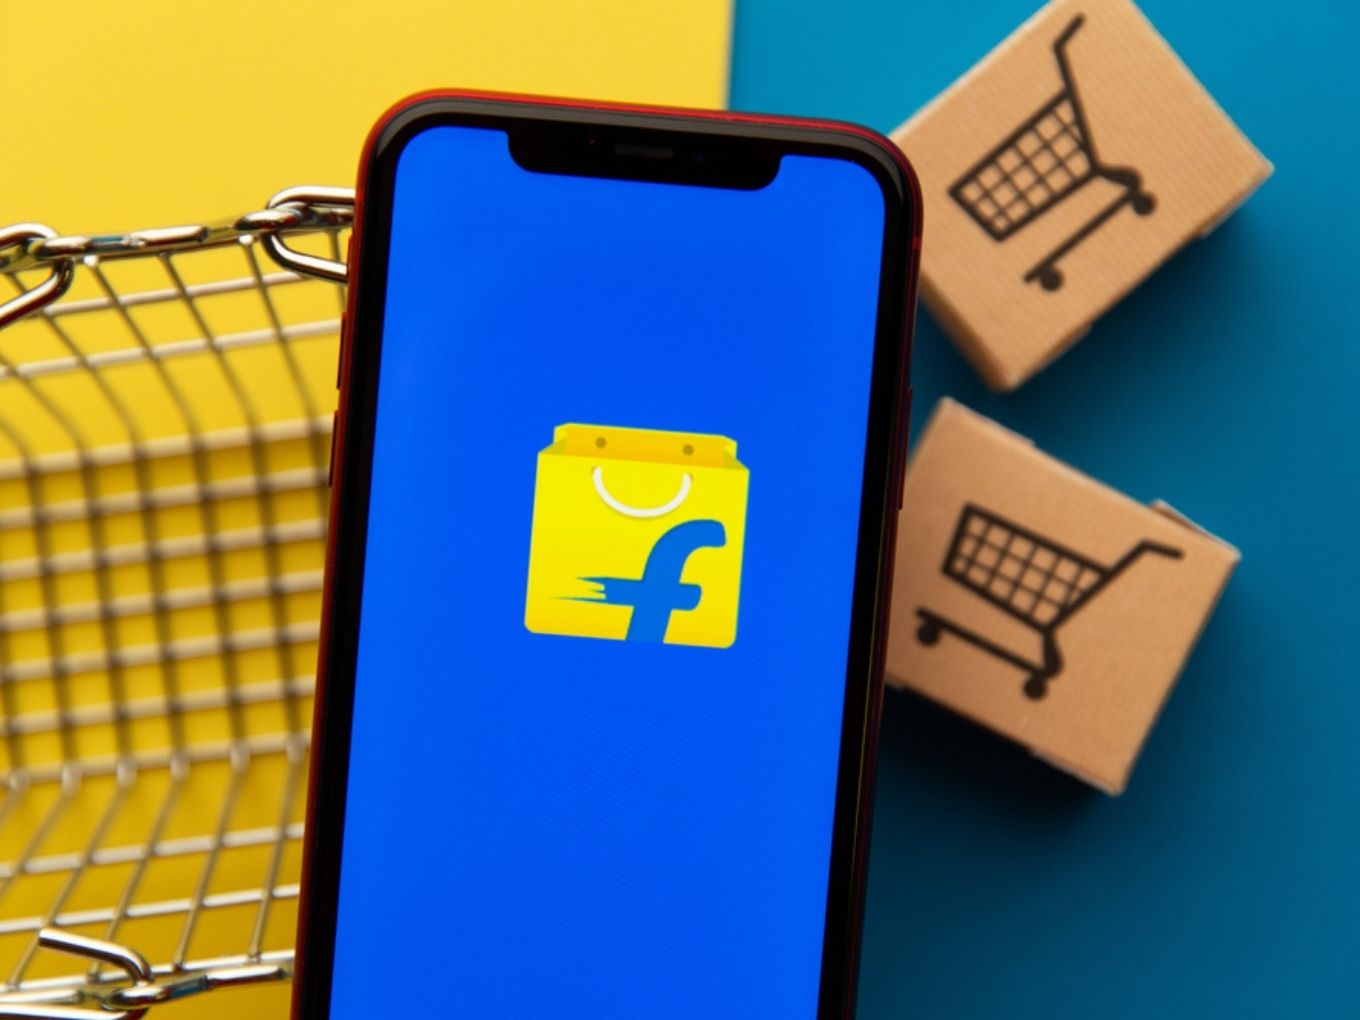 Flipkart Sales Come To An End With 1.5x Sellers In ‘Crorepati Club’